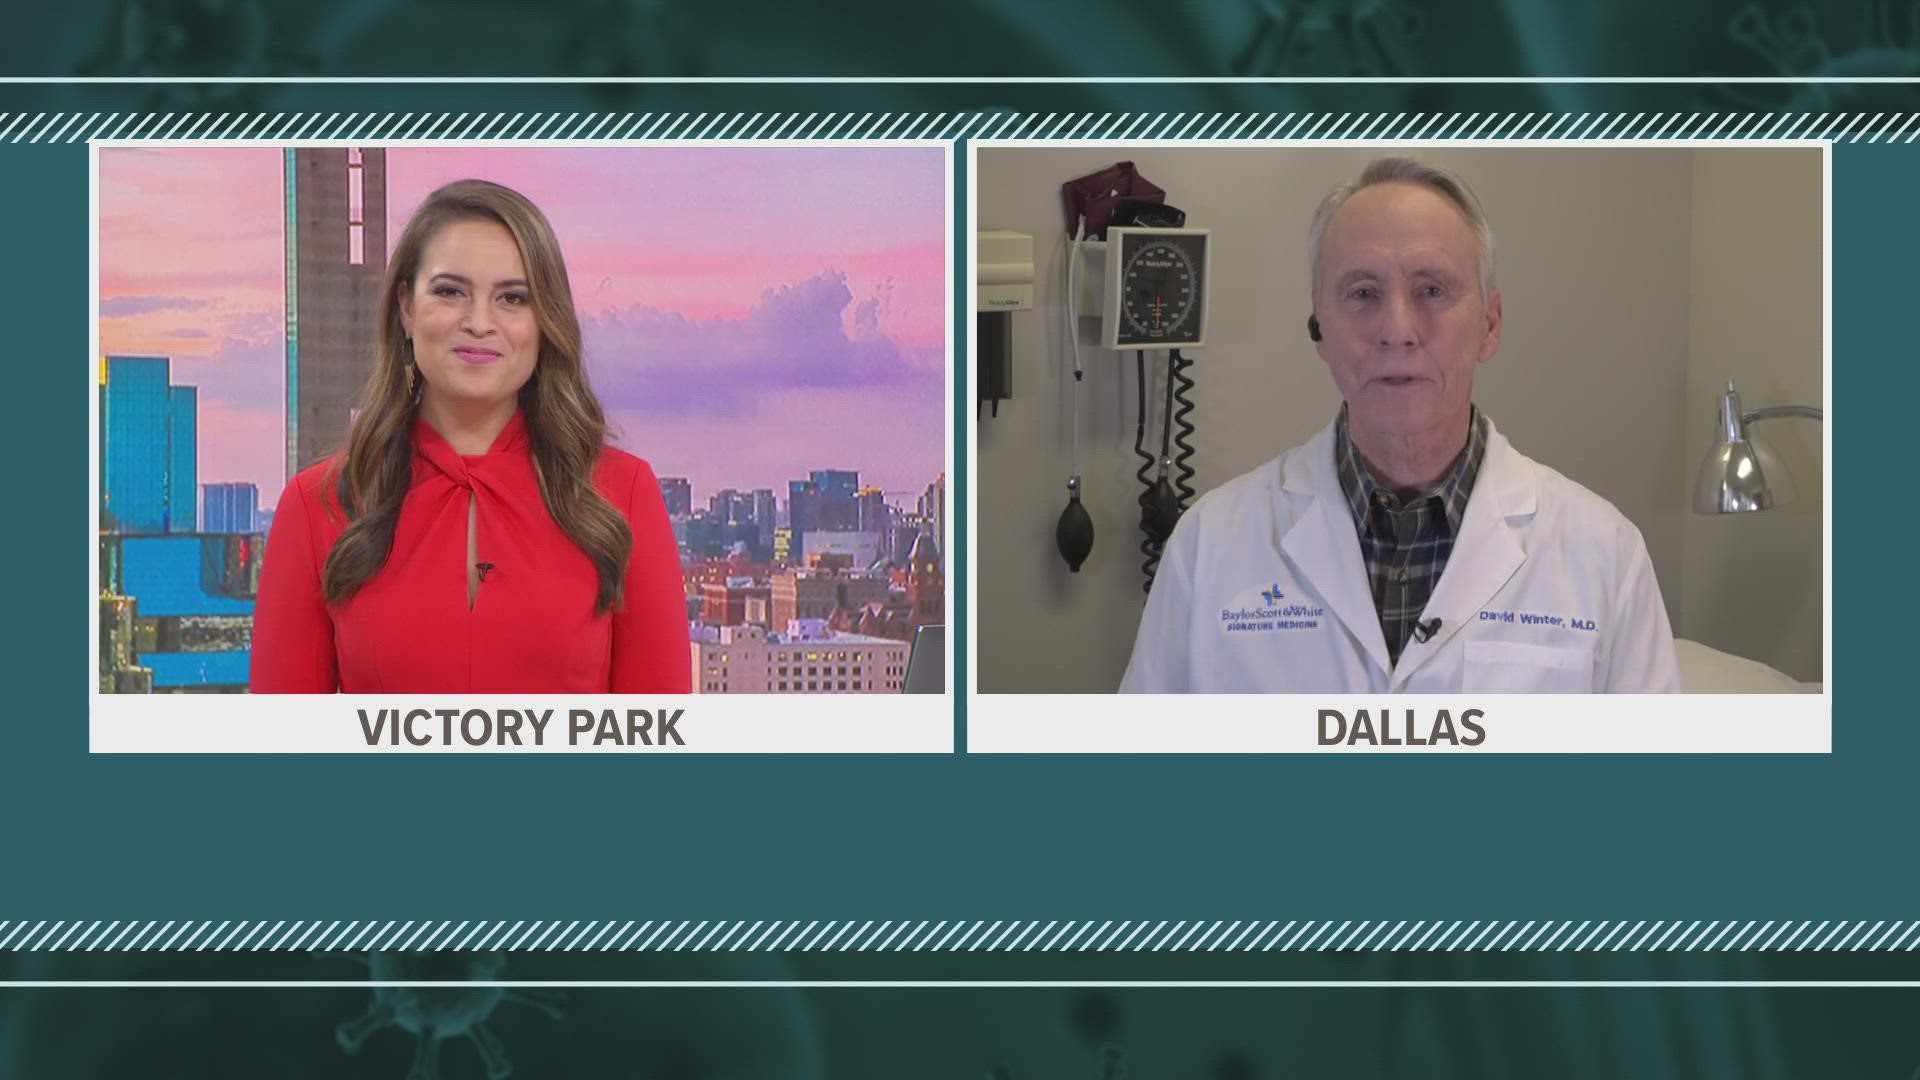 Dr. David Winter from Baylor Scott & White health joins us to discuss the booster shots and the omicron variant.